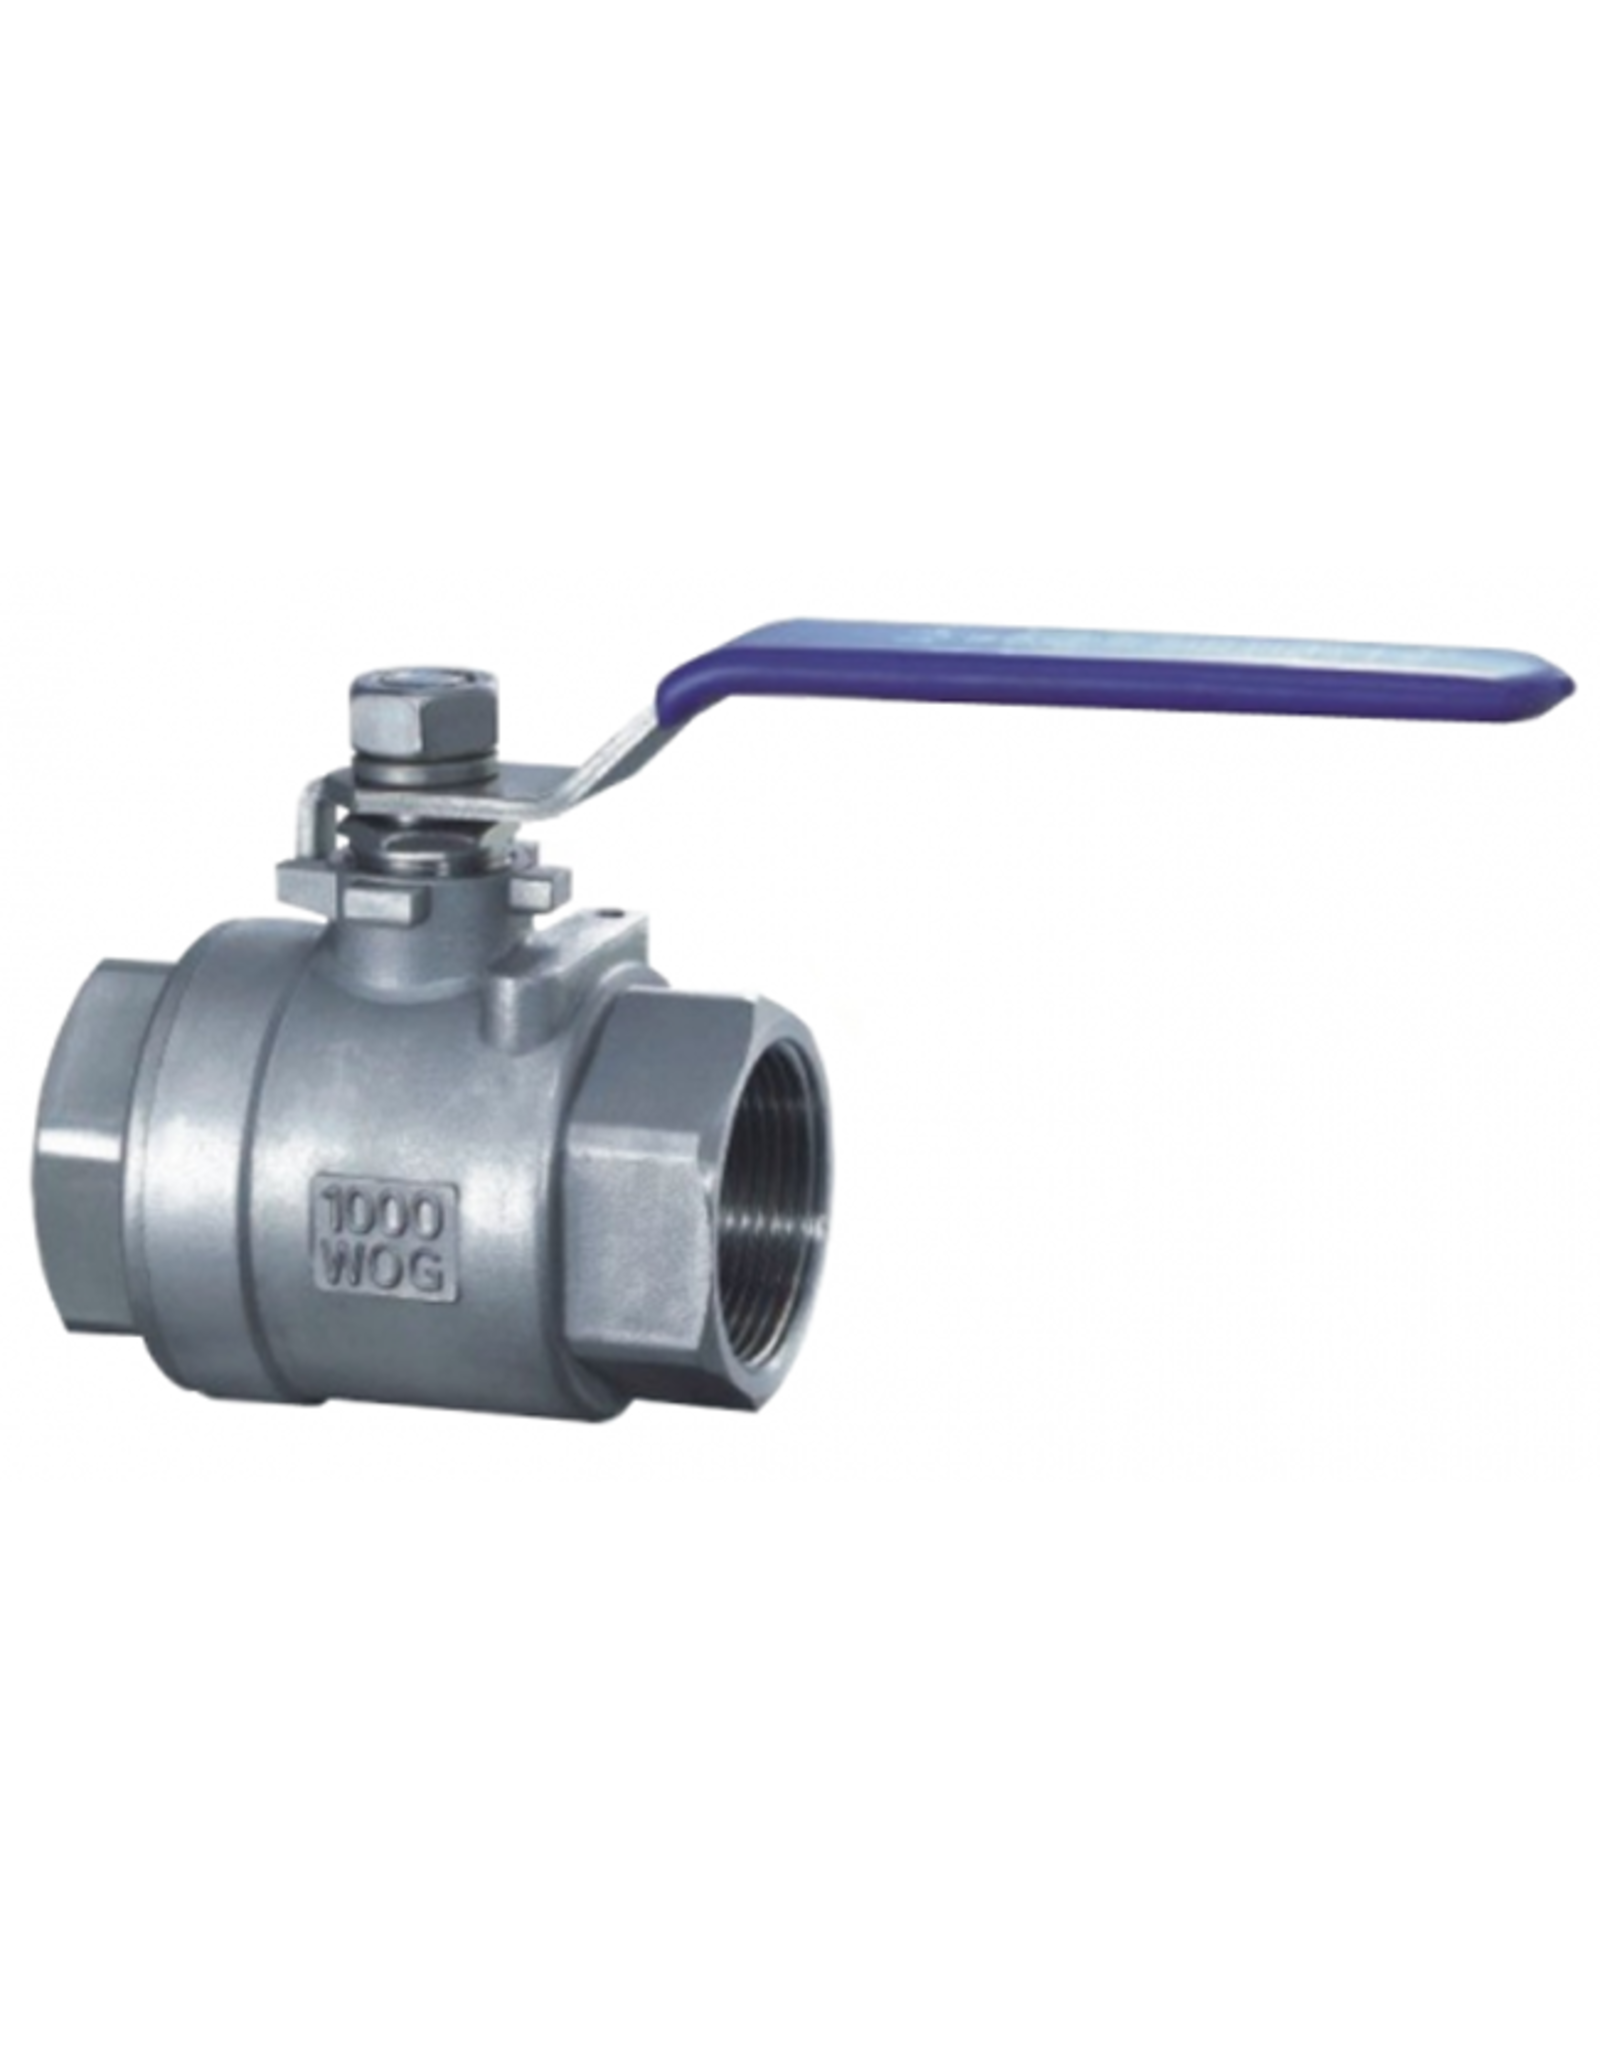 Ball Valve Stainless Steel 1/2" NPT - Two Piece